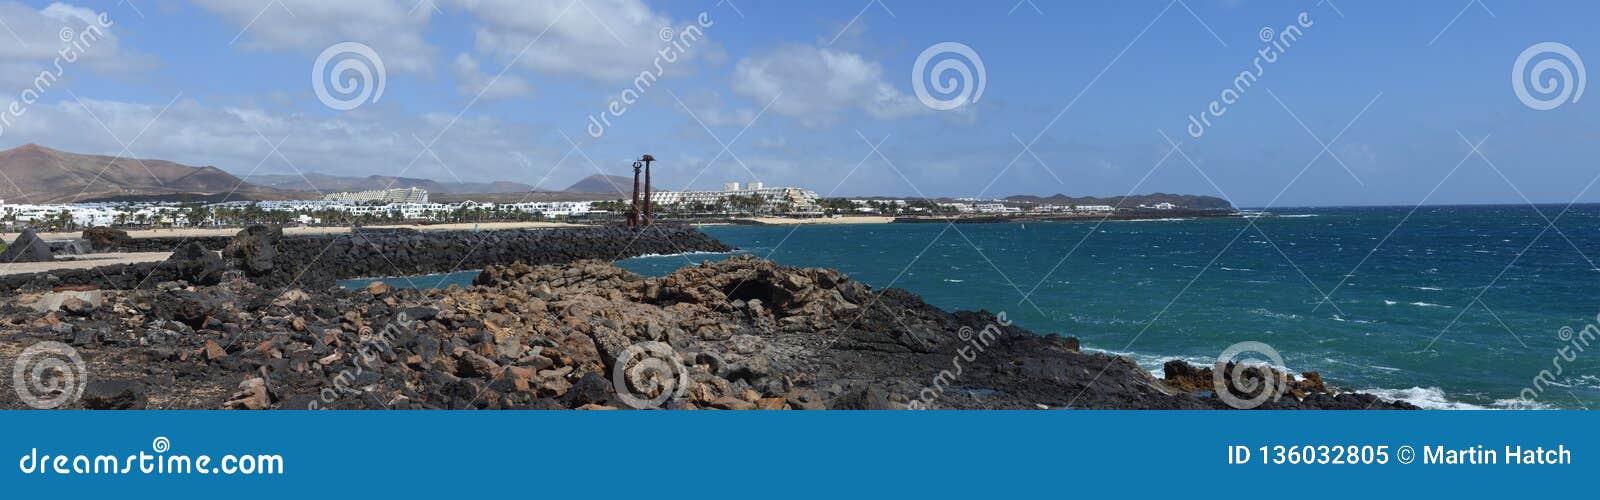 view of the beach at costa teguise lanzarote